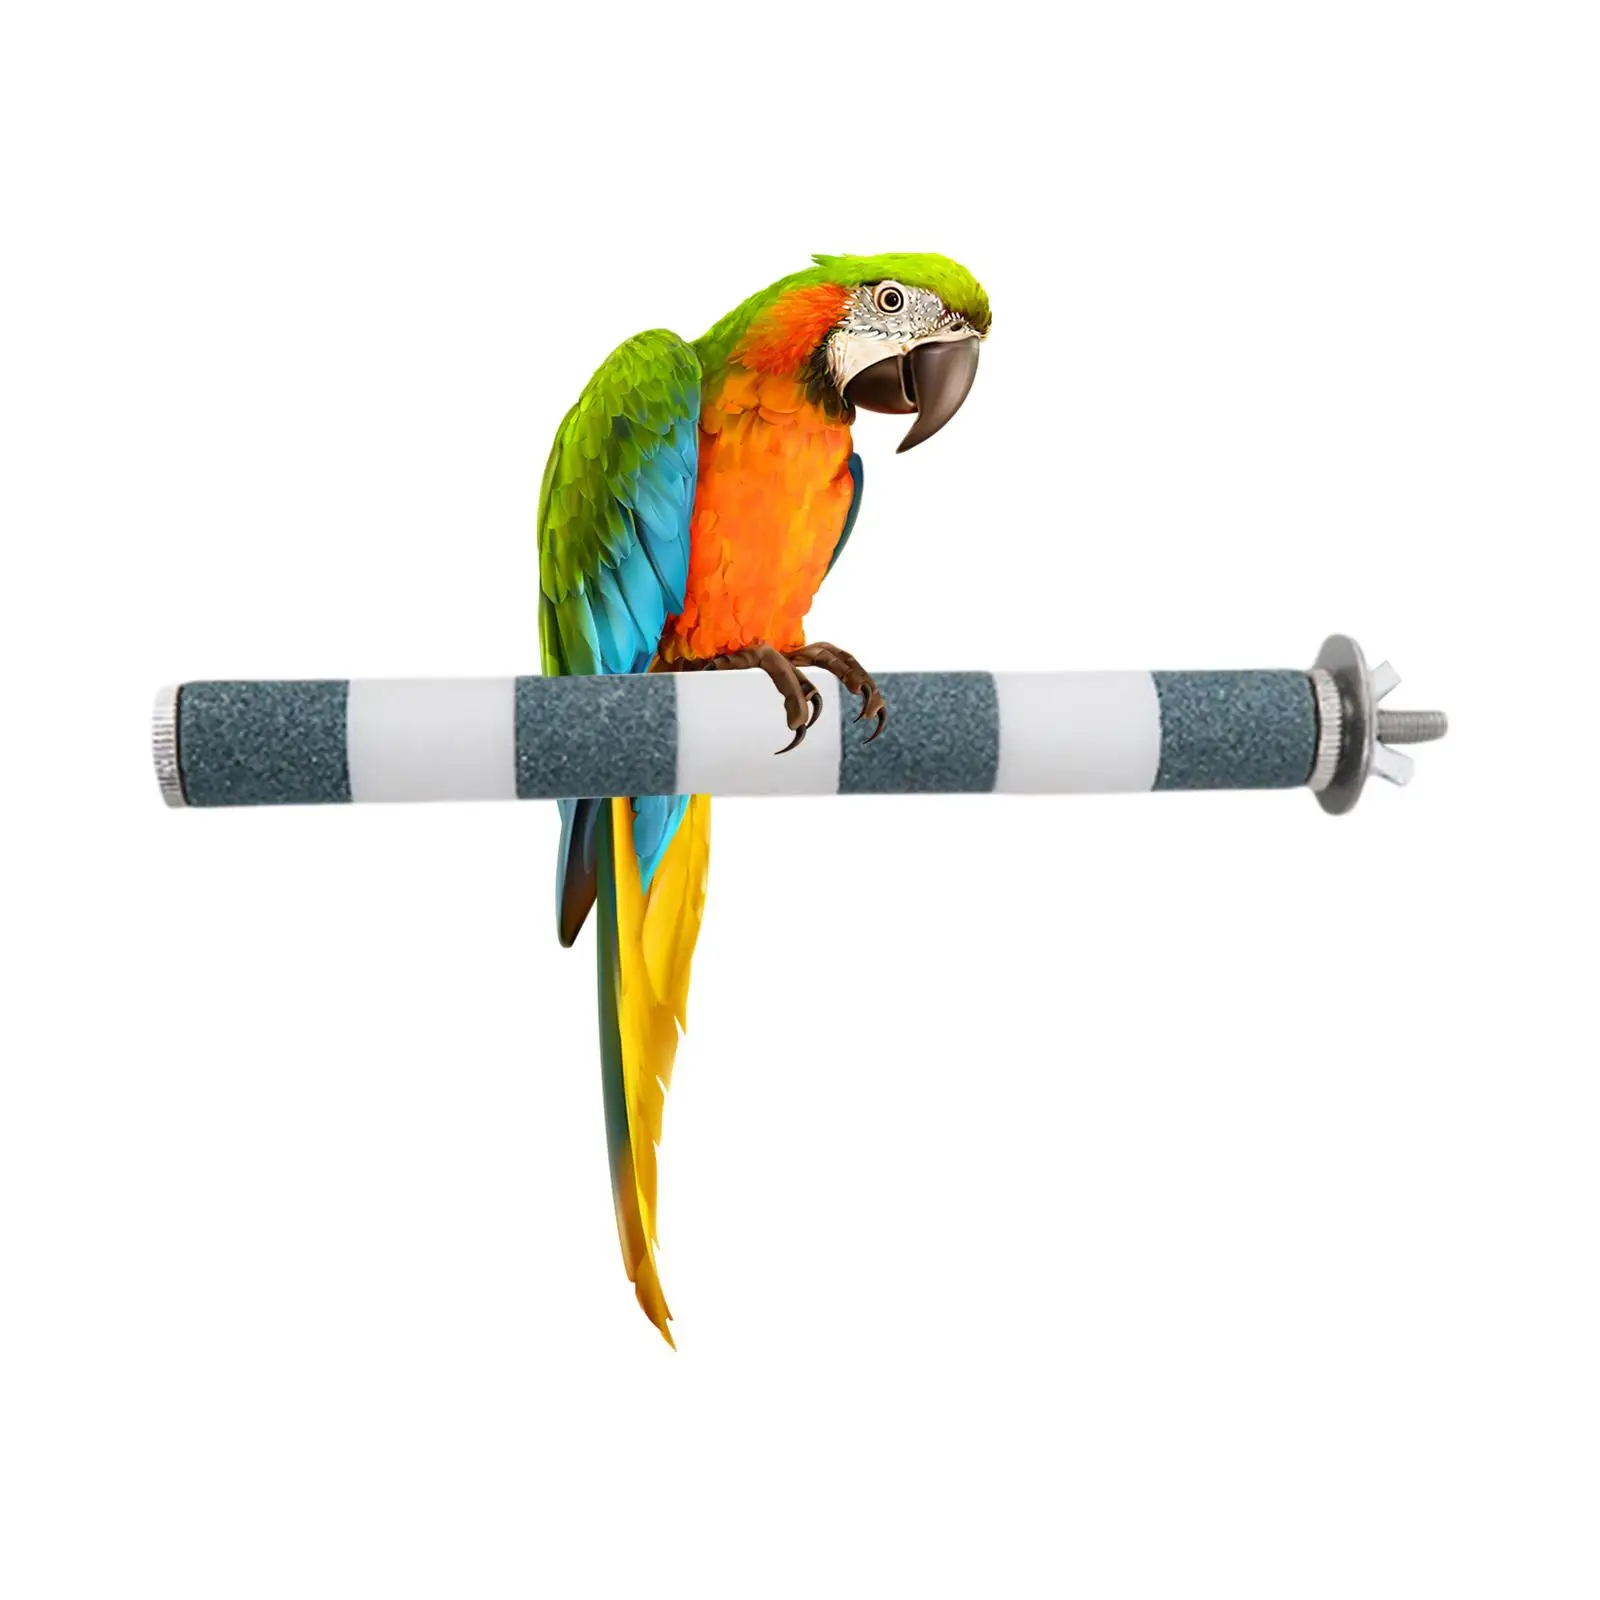 1Pc Parrot Cage Rough Surface Wood Paw Grinding Perch Stand Stick Platform Bird Roller Toy Fit For Small And Medium Sized Birds